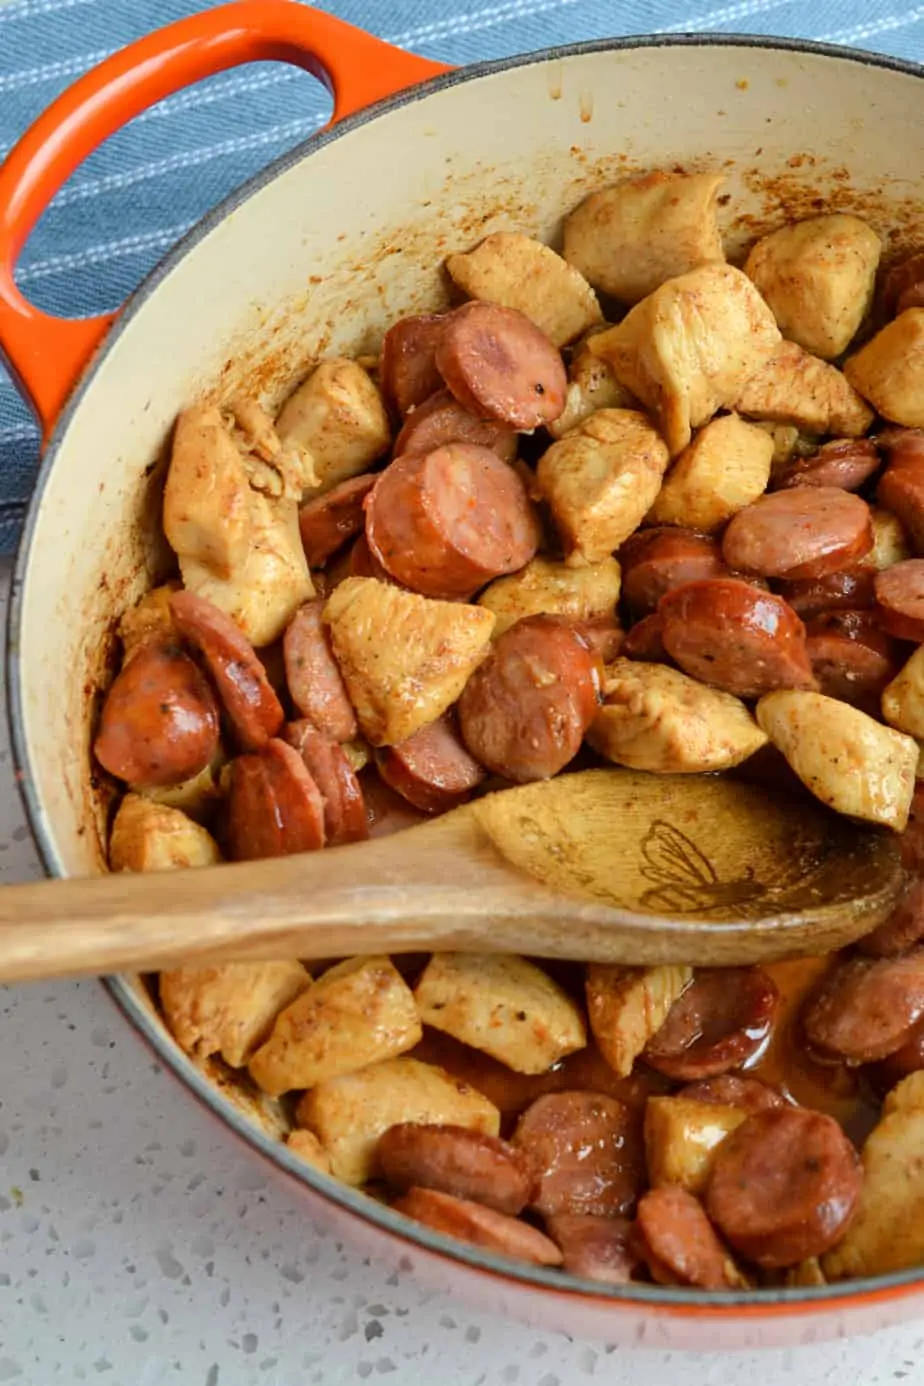 Andouille sausage and chicken are browned for the first step of this recipe. 